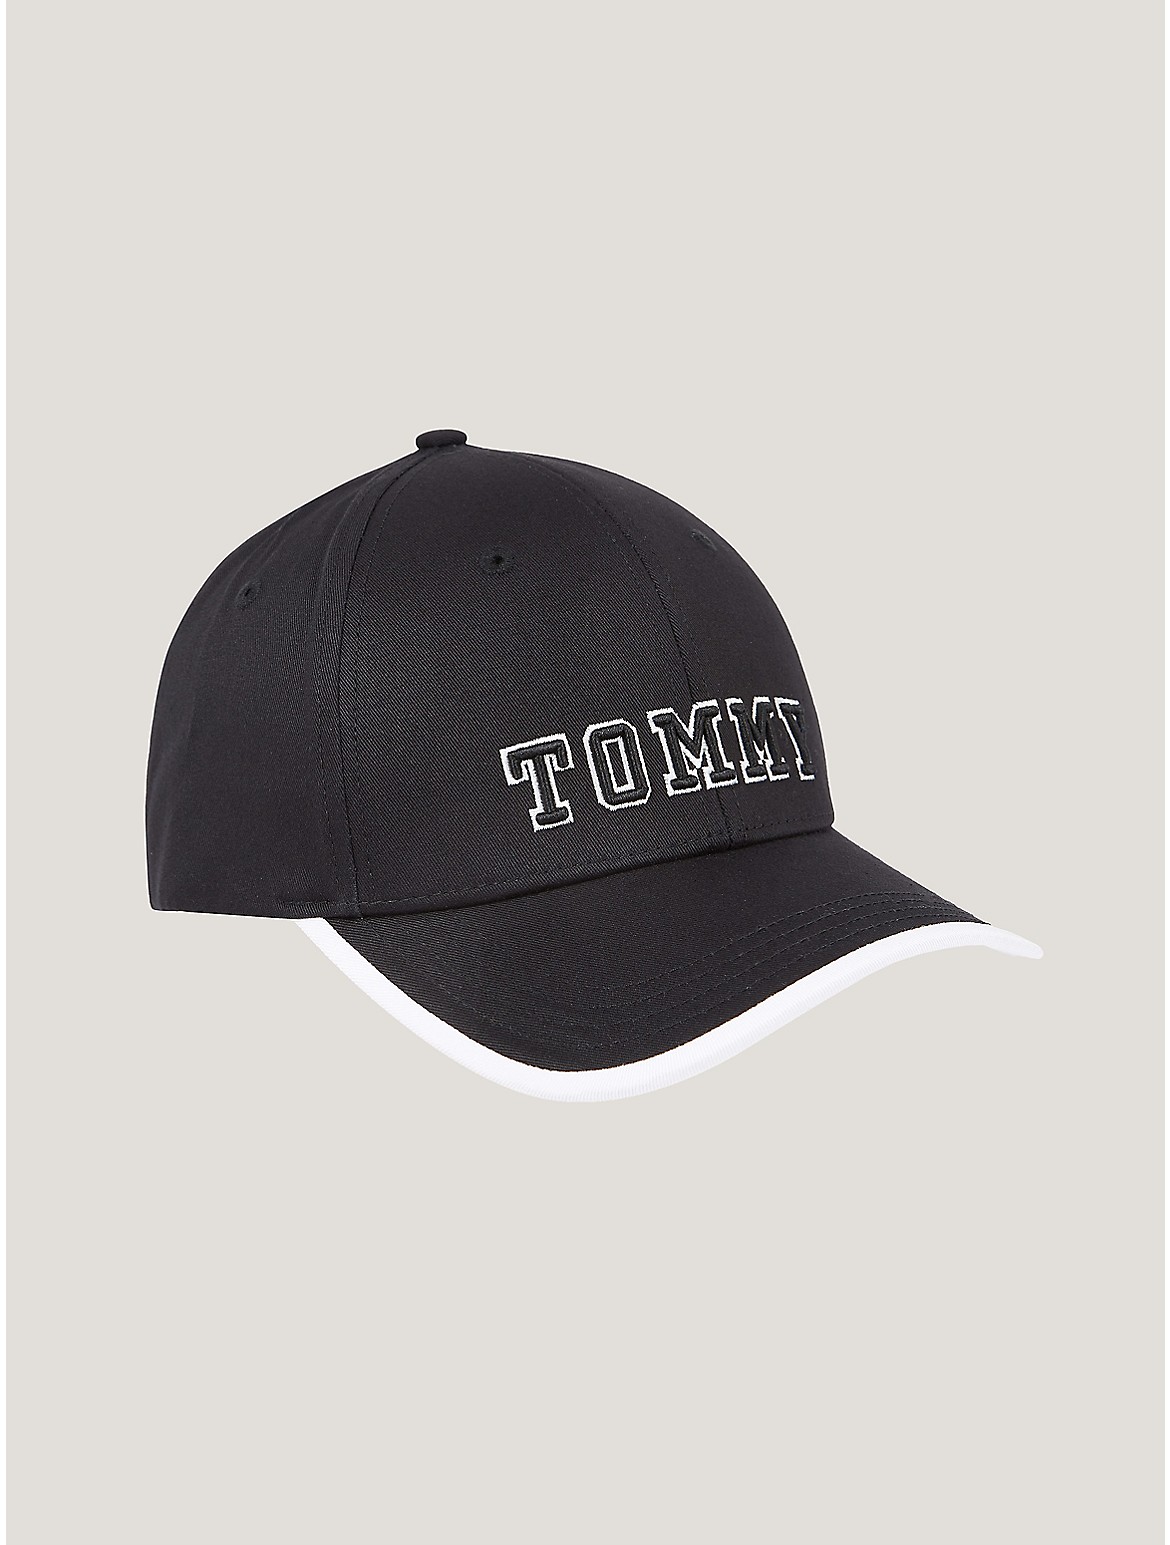 Tommy Hilfiger Men's Archive Embroidered Monotype Logo Cap